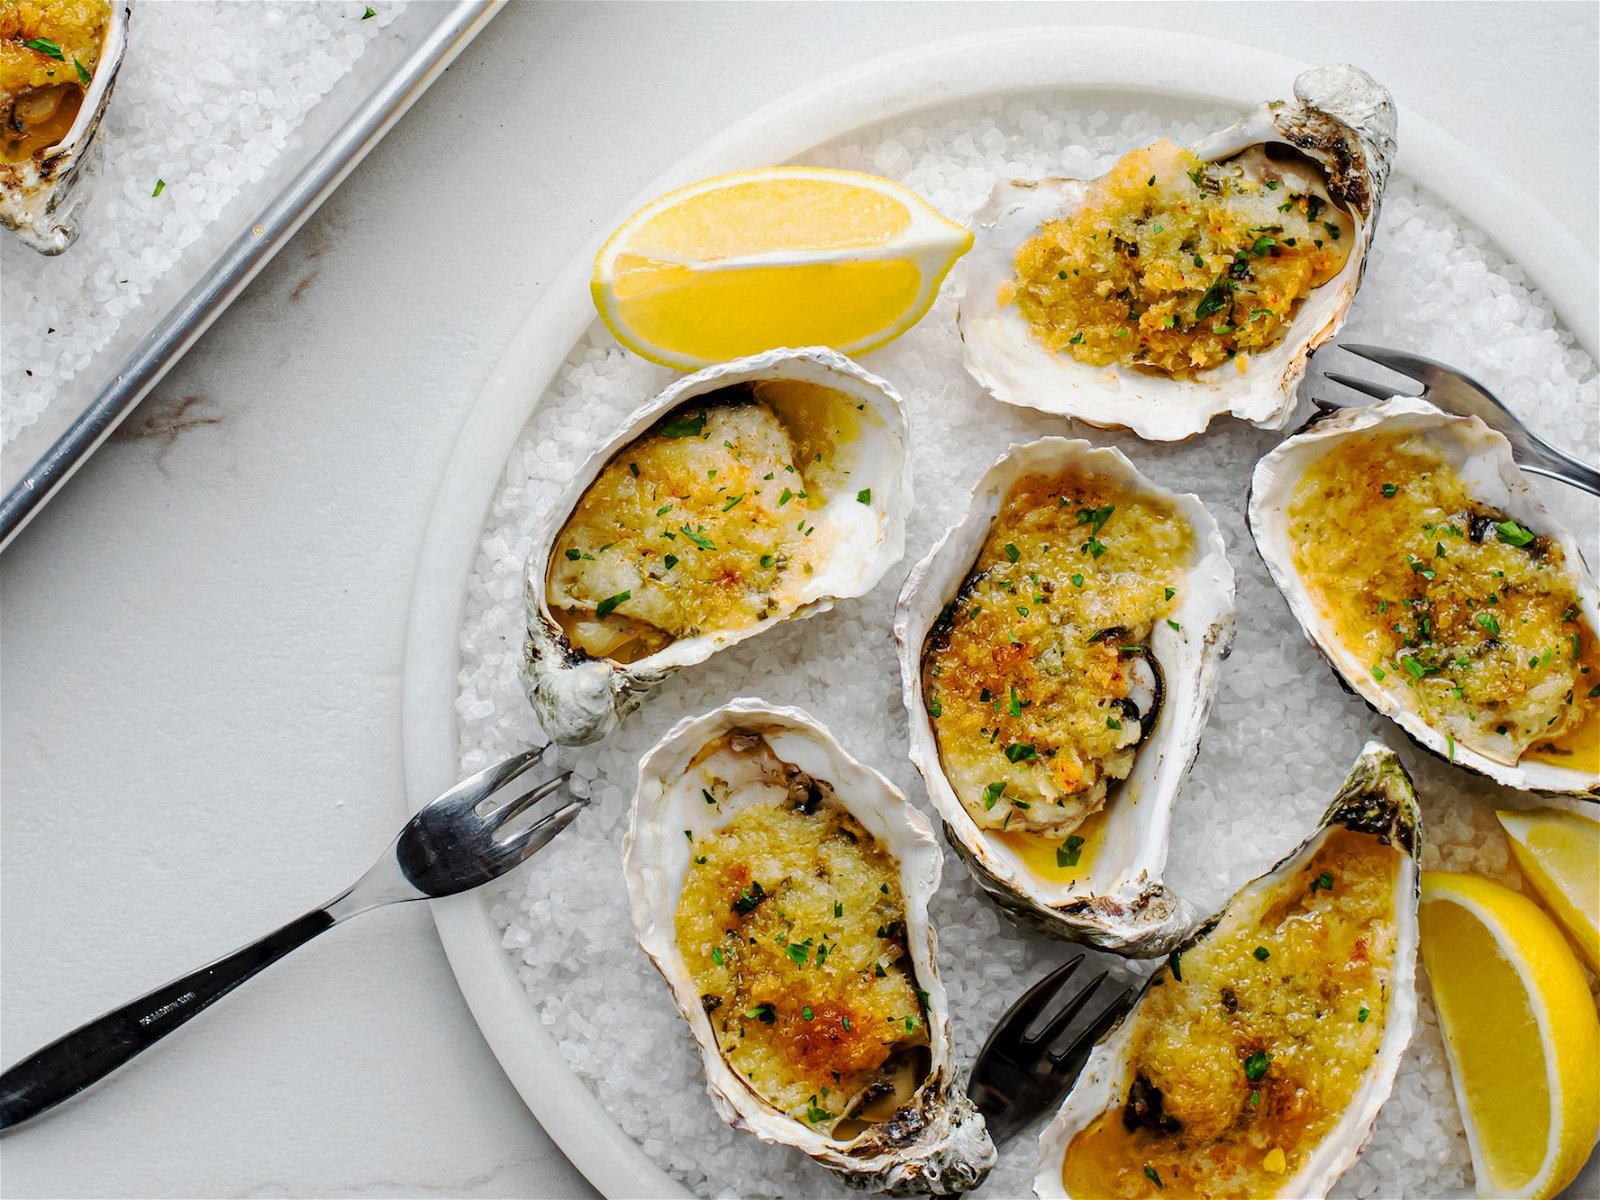 c1bce1cfc631a706ab01cefbe1f9122a easy butter and herb baked oysters 4049551 hero 01 11bfc0f1661f4045a19d7749aa6b34f2 - Fantastic Food To Eat In Halong Bay: 15 Delicious Dishes